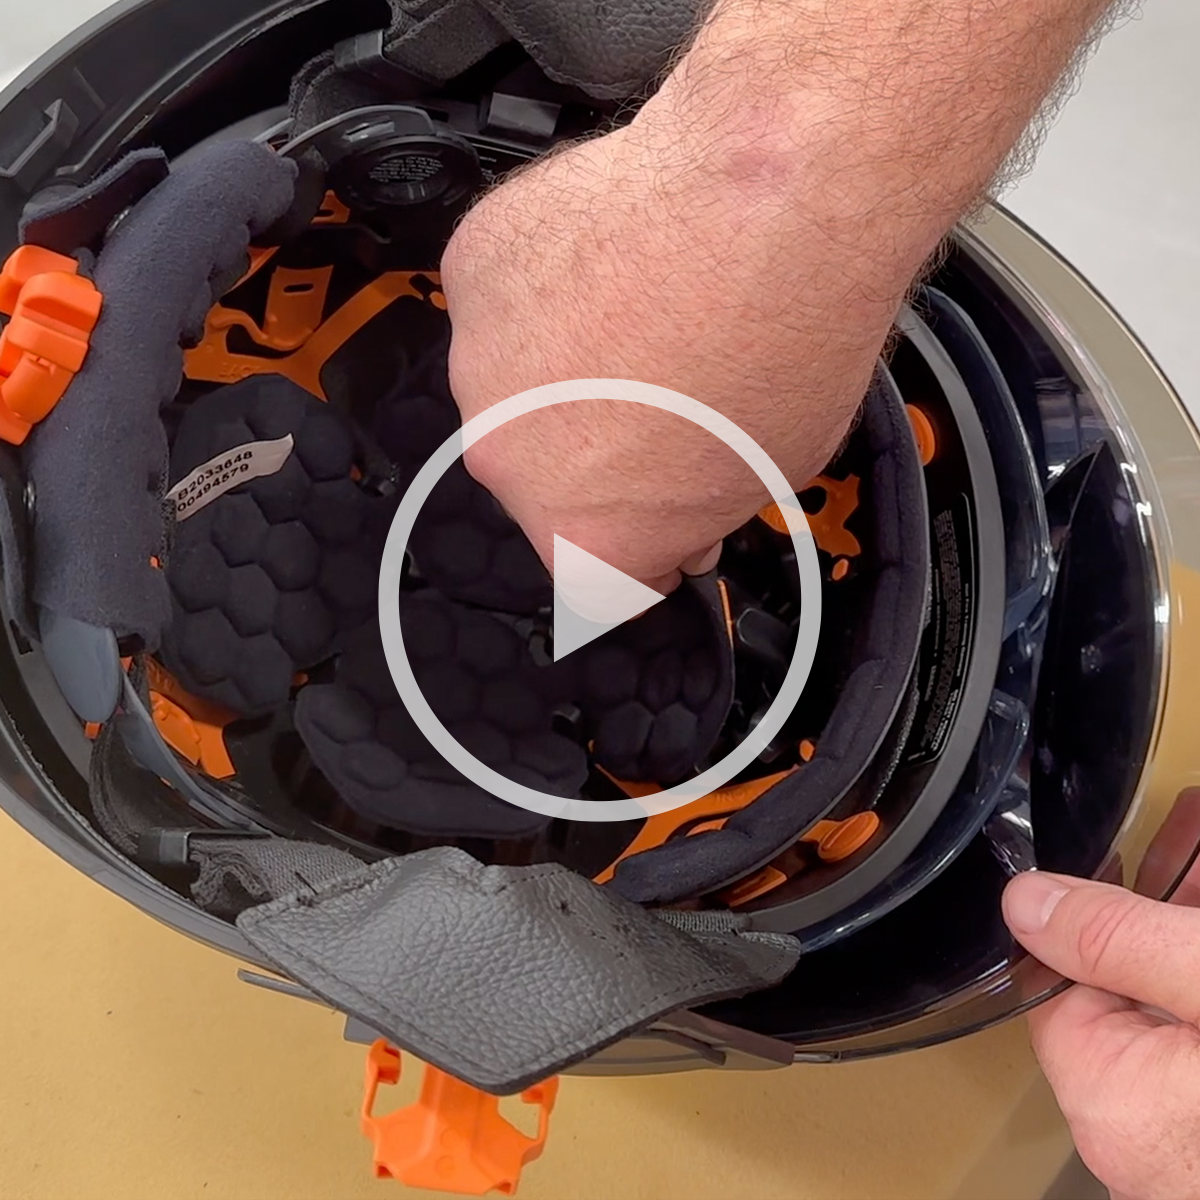 Changing the Comfort Padding on a F20H Firefighting Helmet - New Video